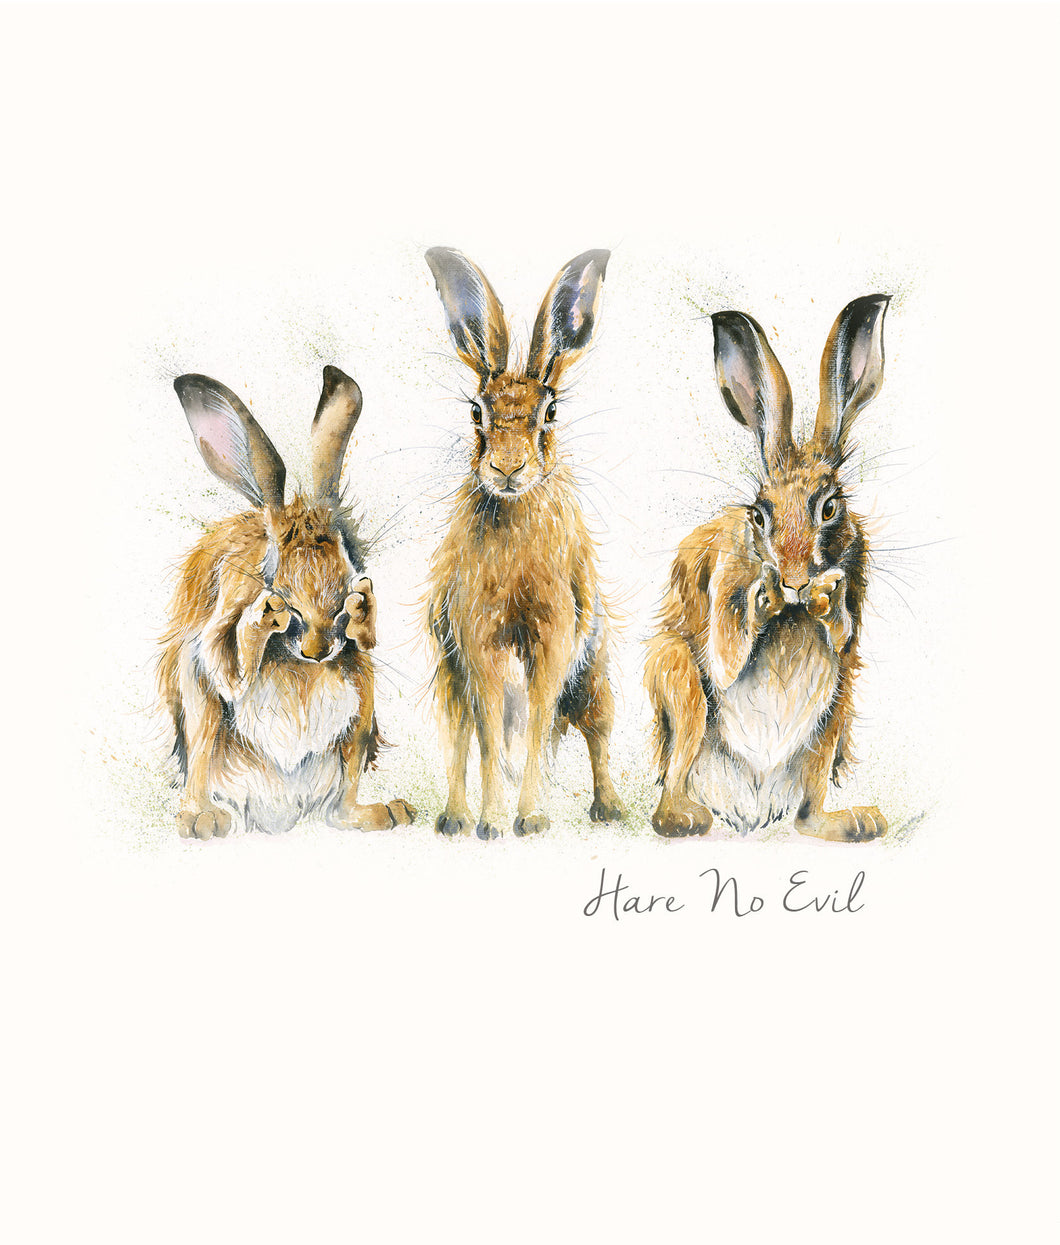 Hare No Evil - Blank Greeting Card